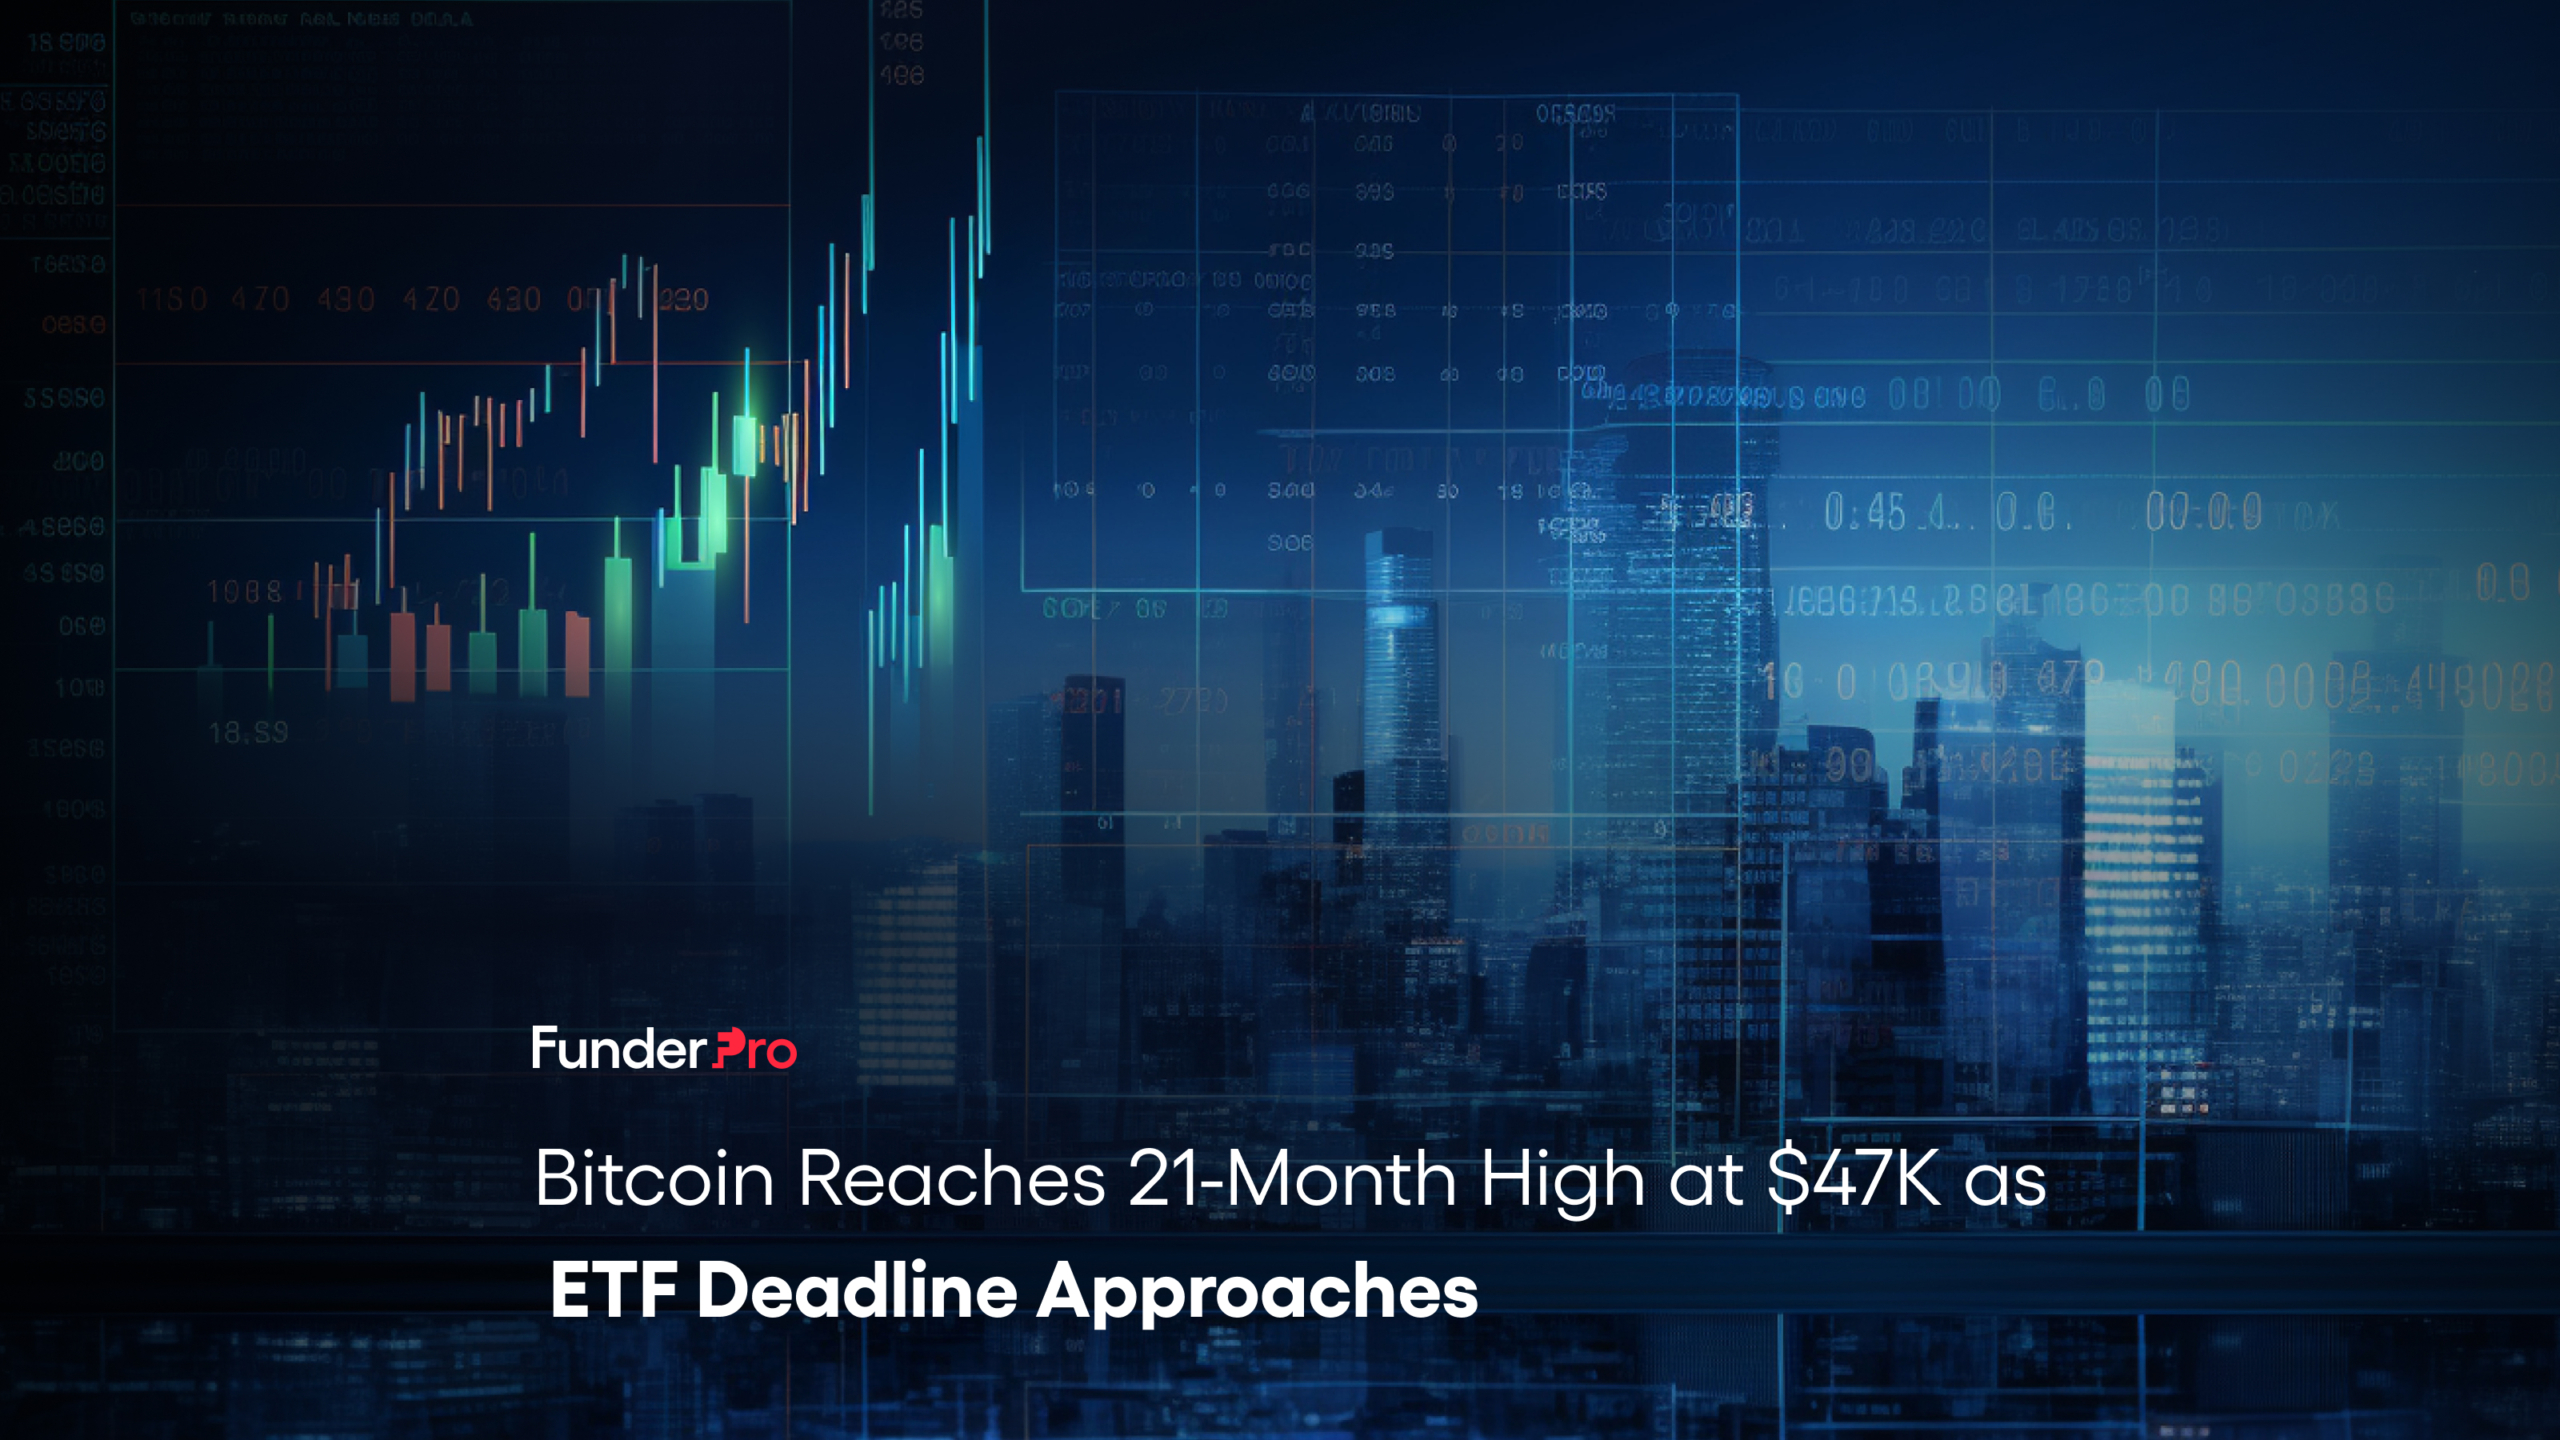 Bitcoin Reaches 21-Month High at $47K as ETF Deadline Approaches